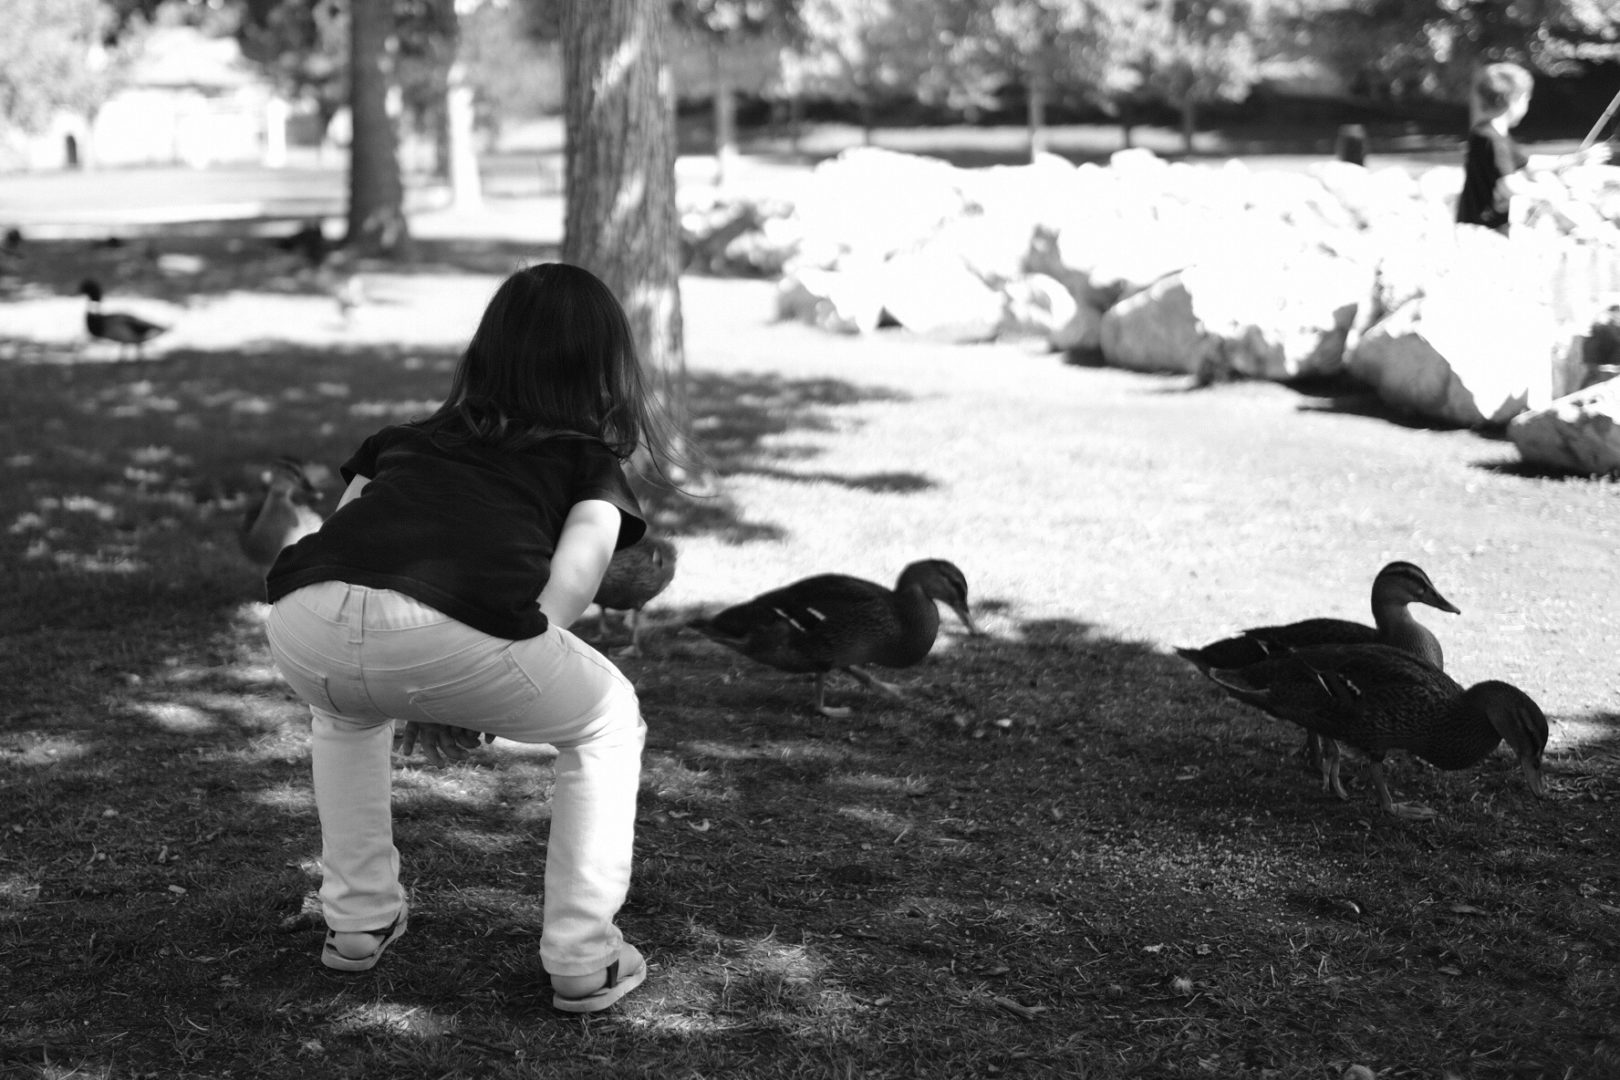 A little girl crouches to get a closer look at a duck.